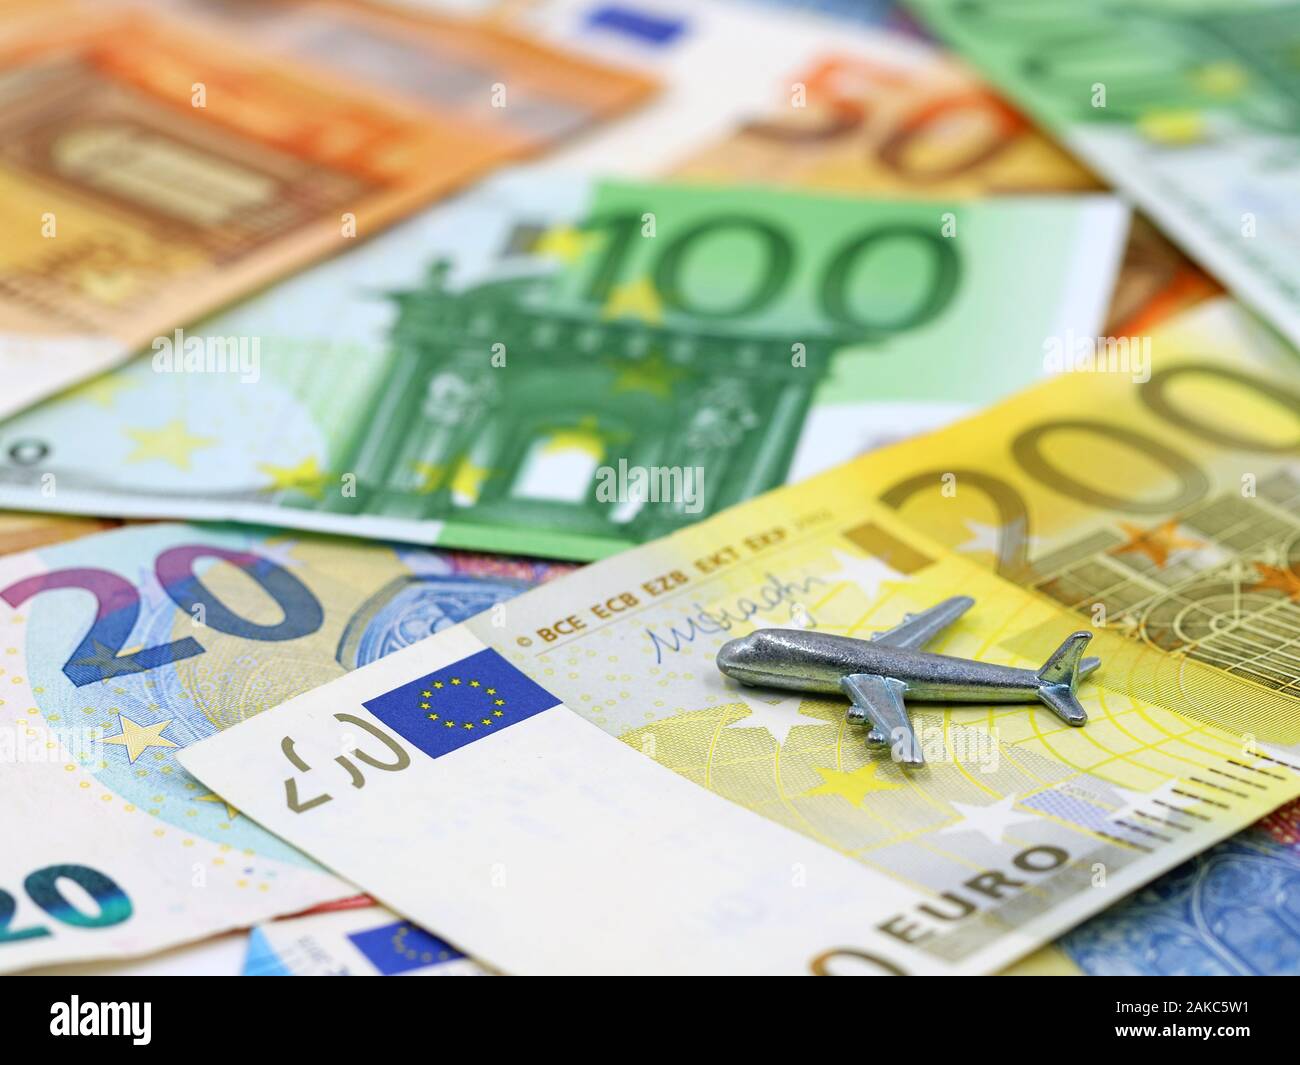 silver miniature airplane on various euro banknotes with copy space Stock Photo